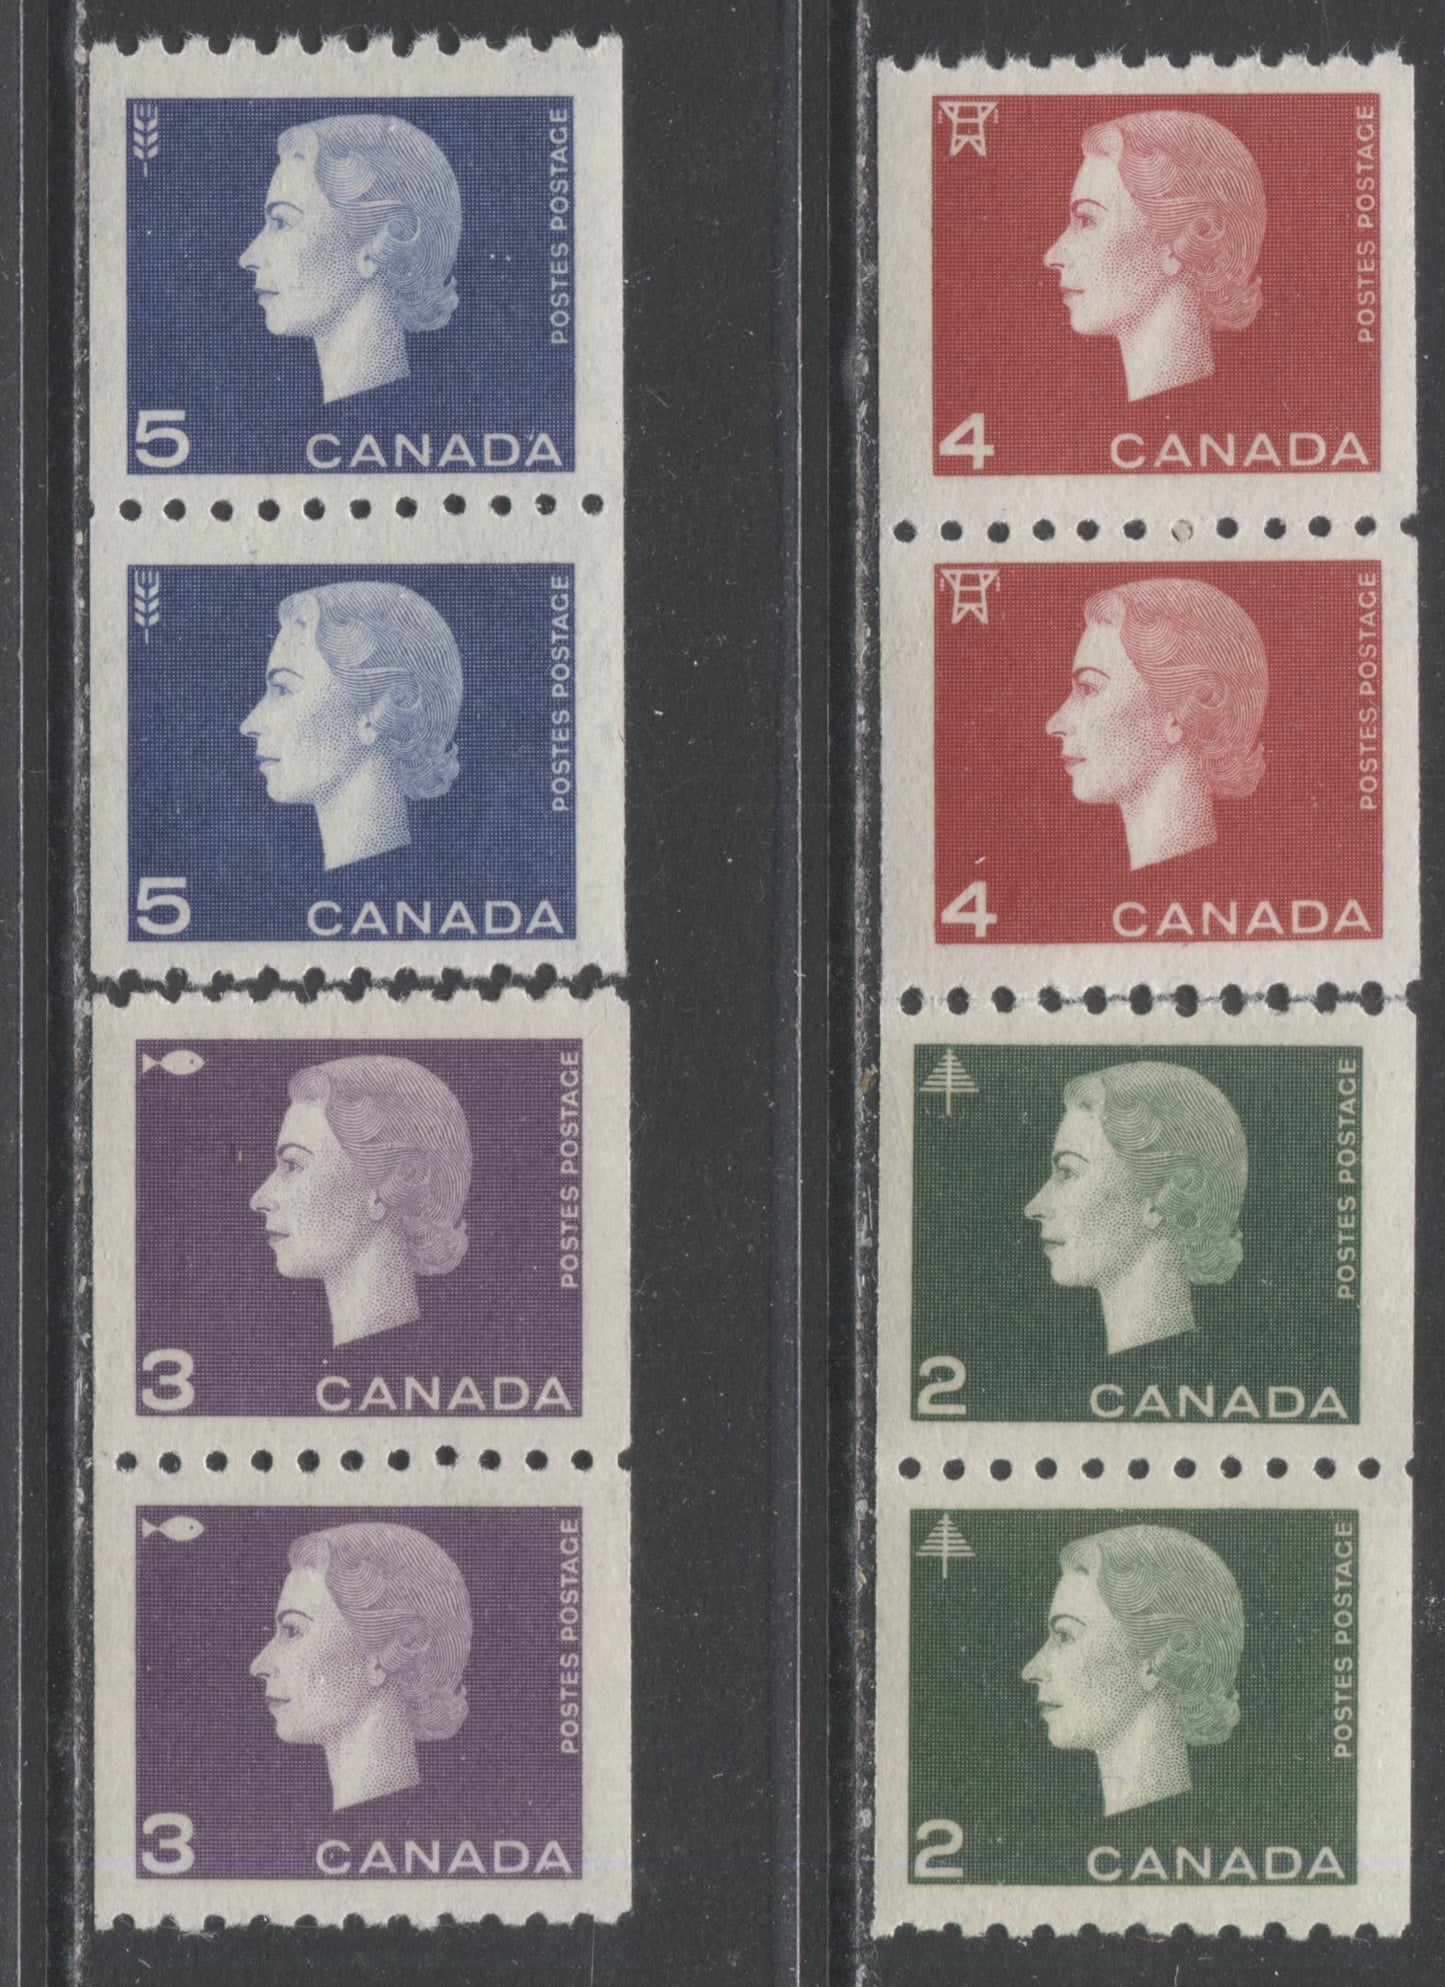 Lot 180 Canada #406-409 2c-5c Green-Violet Blue Forestry-Agriculture, 1962-1963 Cameo Coil Issue, 4 VFNH Coil Pairs